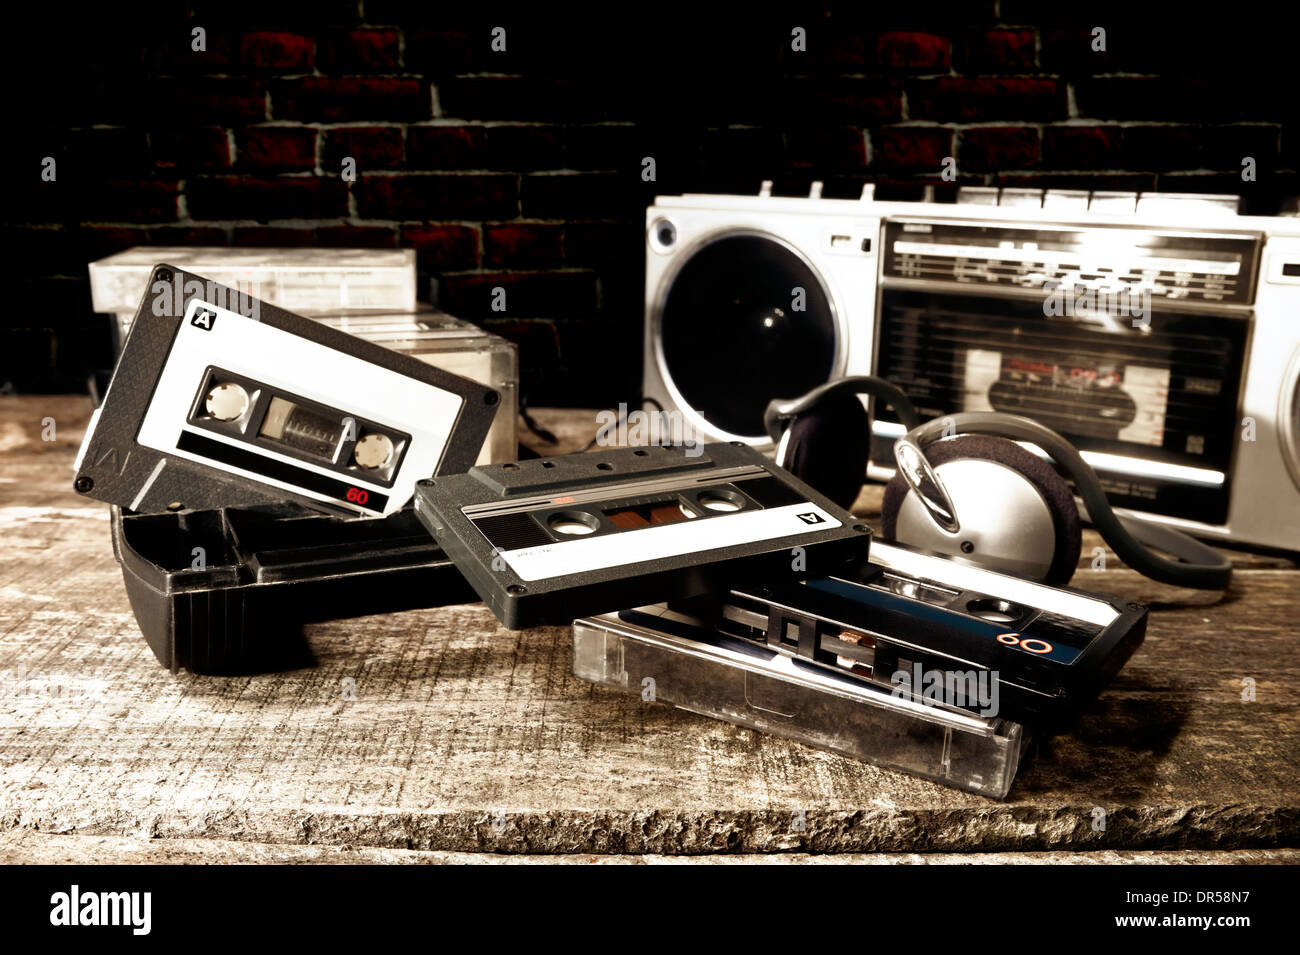 Old cassette tapes and cassette player on wooden surface Stock Photo